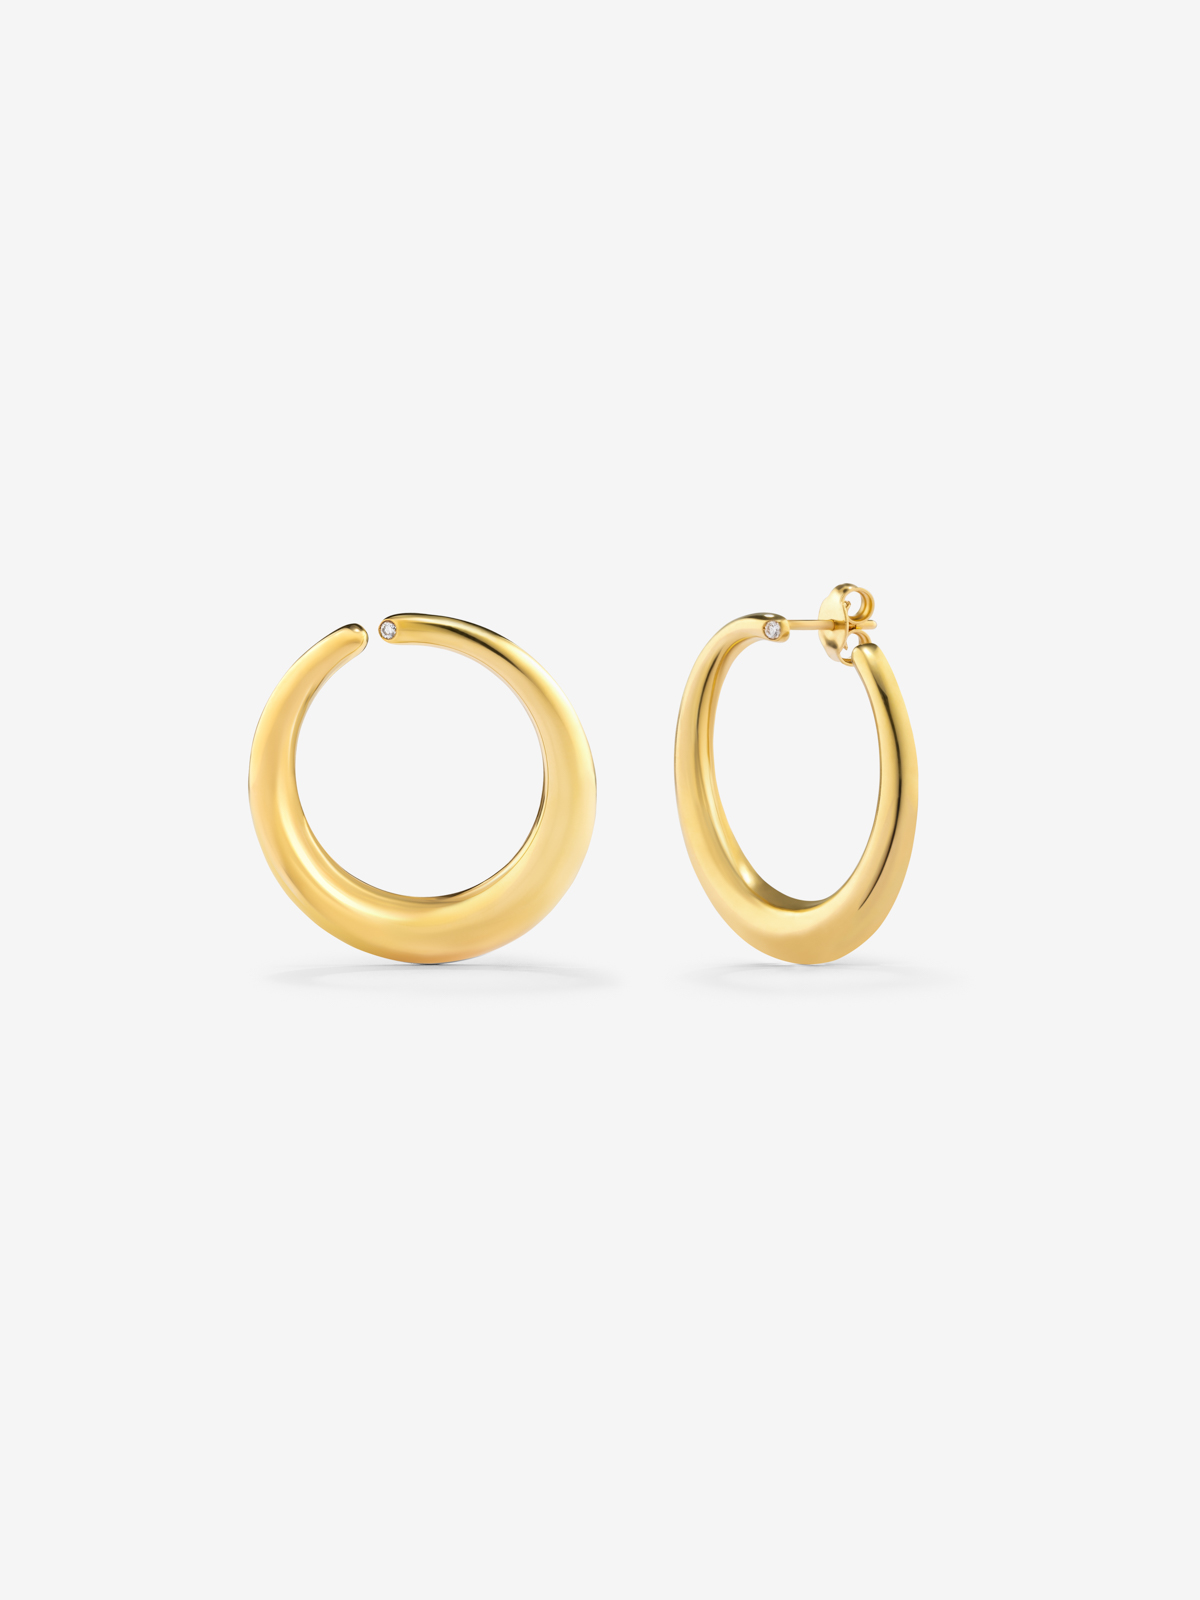 Large smooth hoop earrings in 18K yellow gold with diamond.